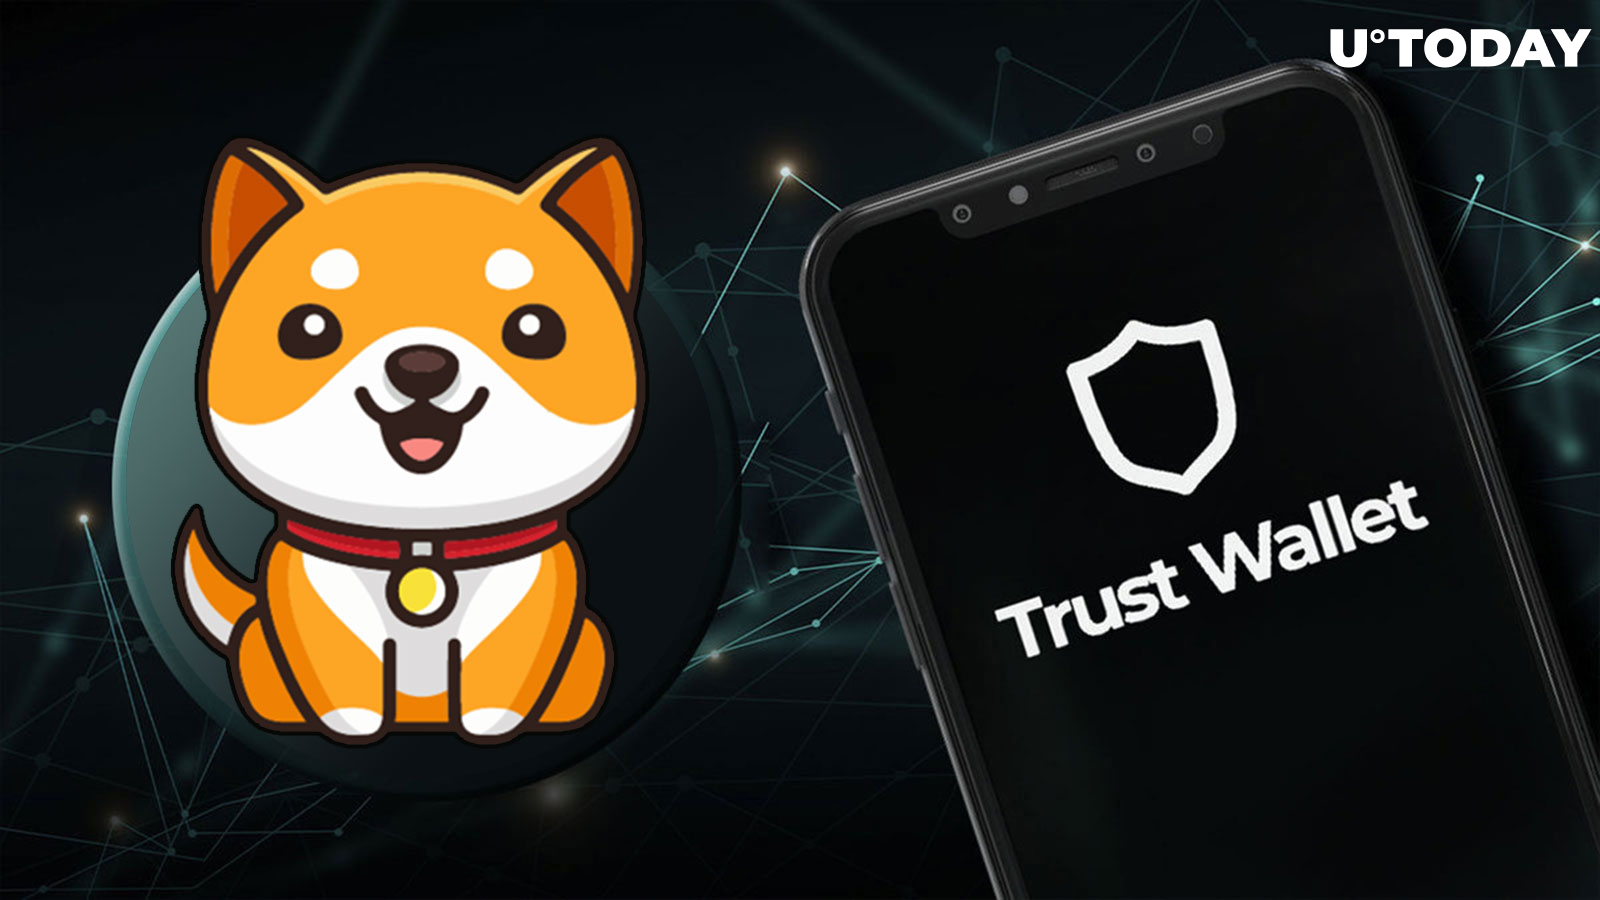 Shiba Inu Rival Baby Doge Now Accessible to 60 Million Trust Wallet Users